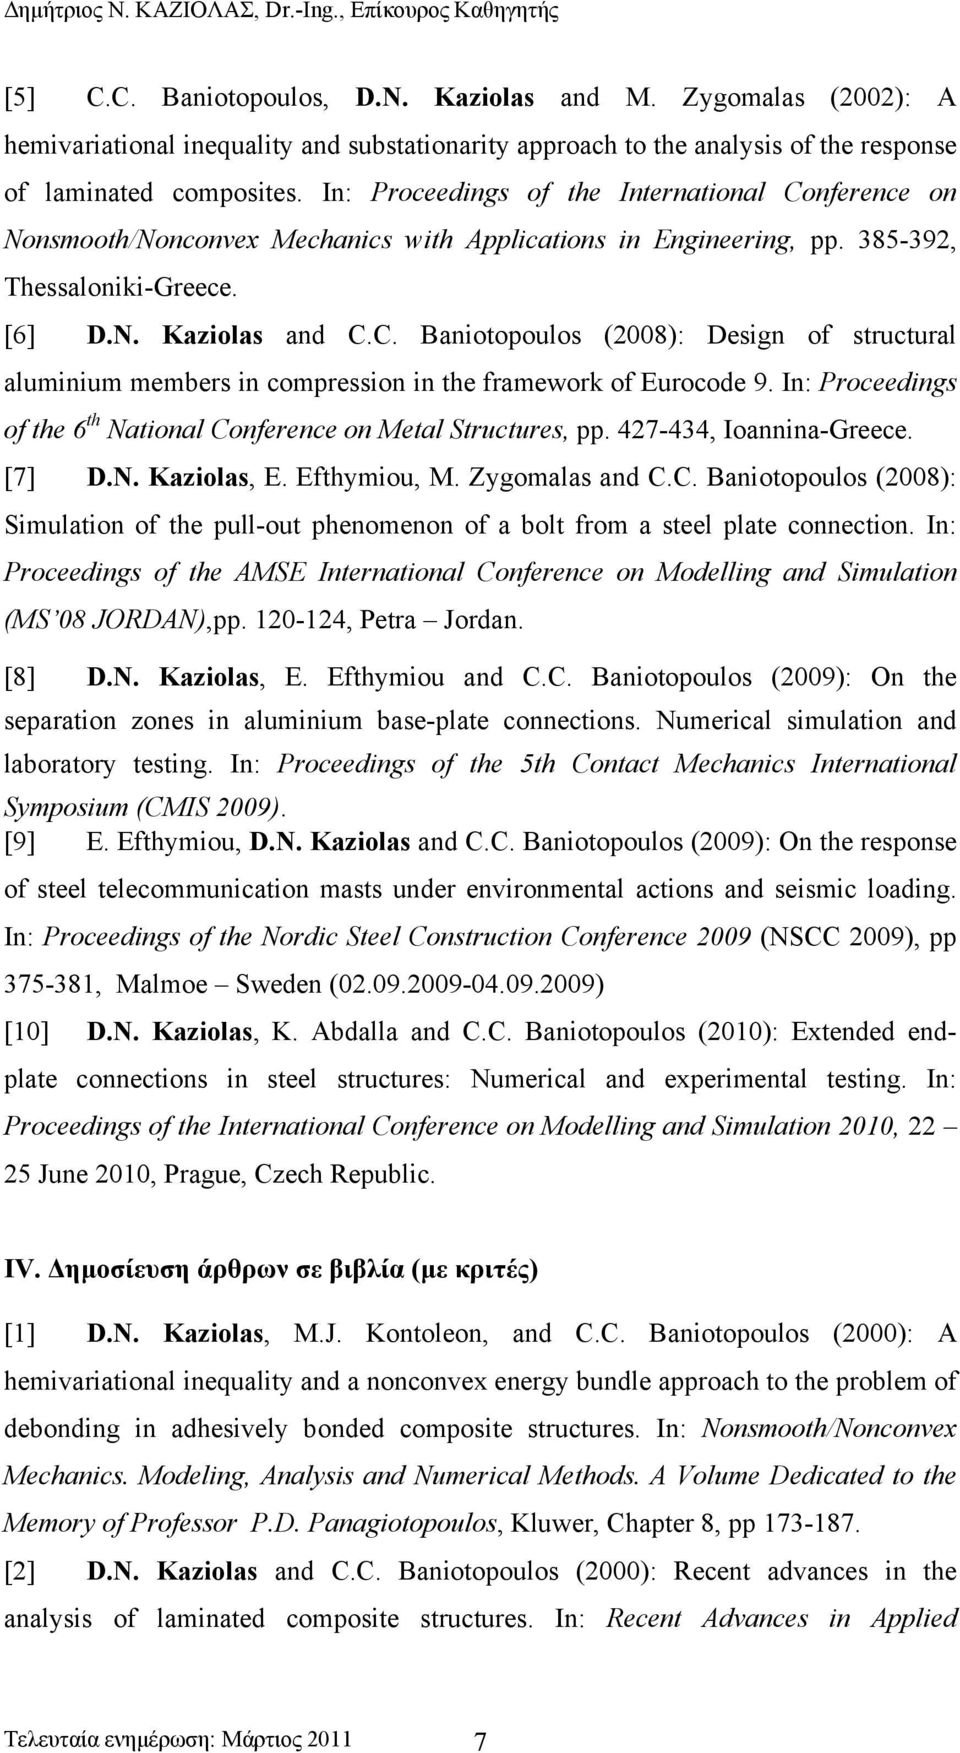 In: Proceedings of the 6 th National Conference on Metal Structures, pp. 427-434, Ioannina-Greece. [7] D.N. Kaziolas, E. Efthymiou, M. Zygomalas and C.C. Baniotopoulos (2008): Simulation of the pull-out phenomenon of a bolt from a steel plate connection.